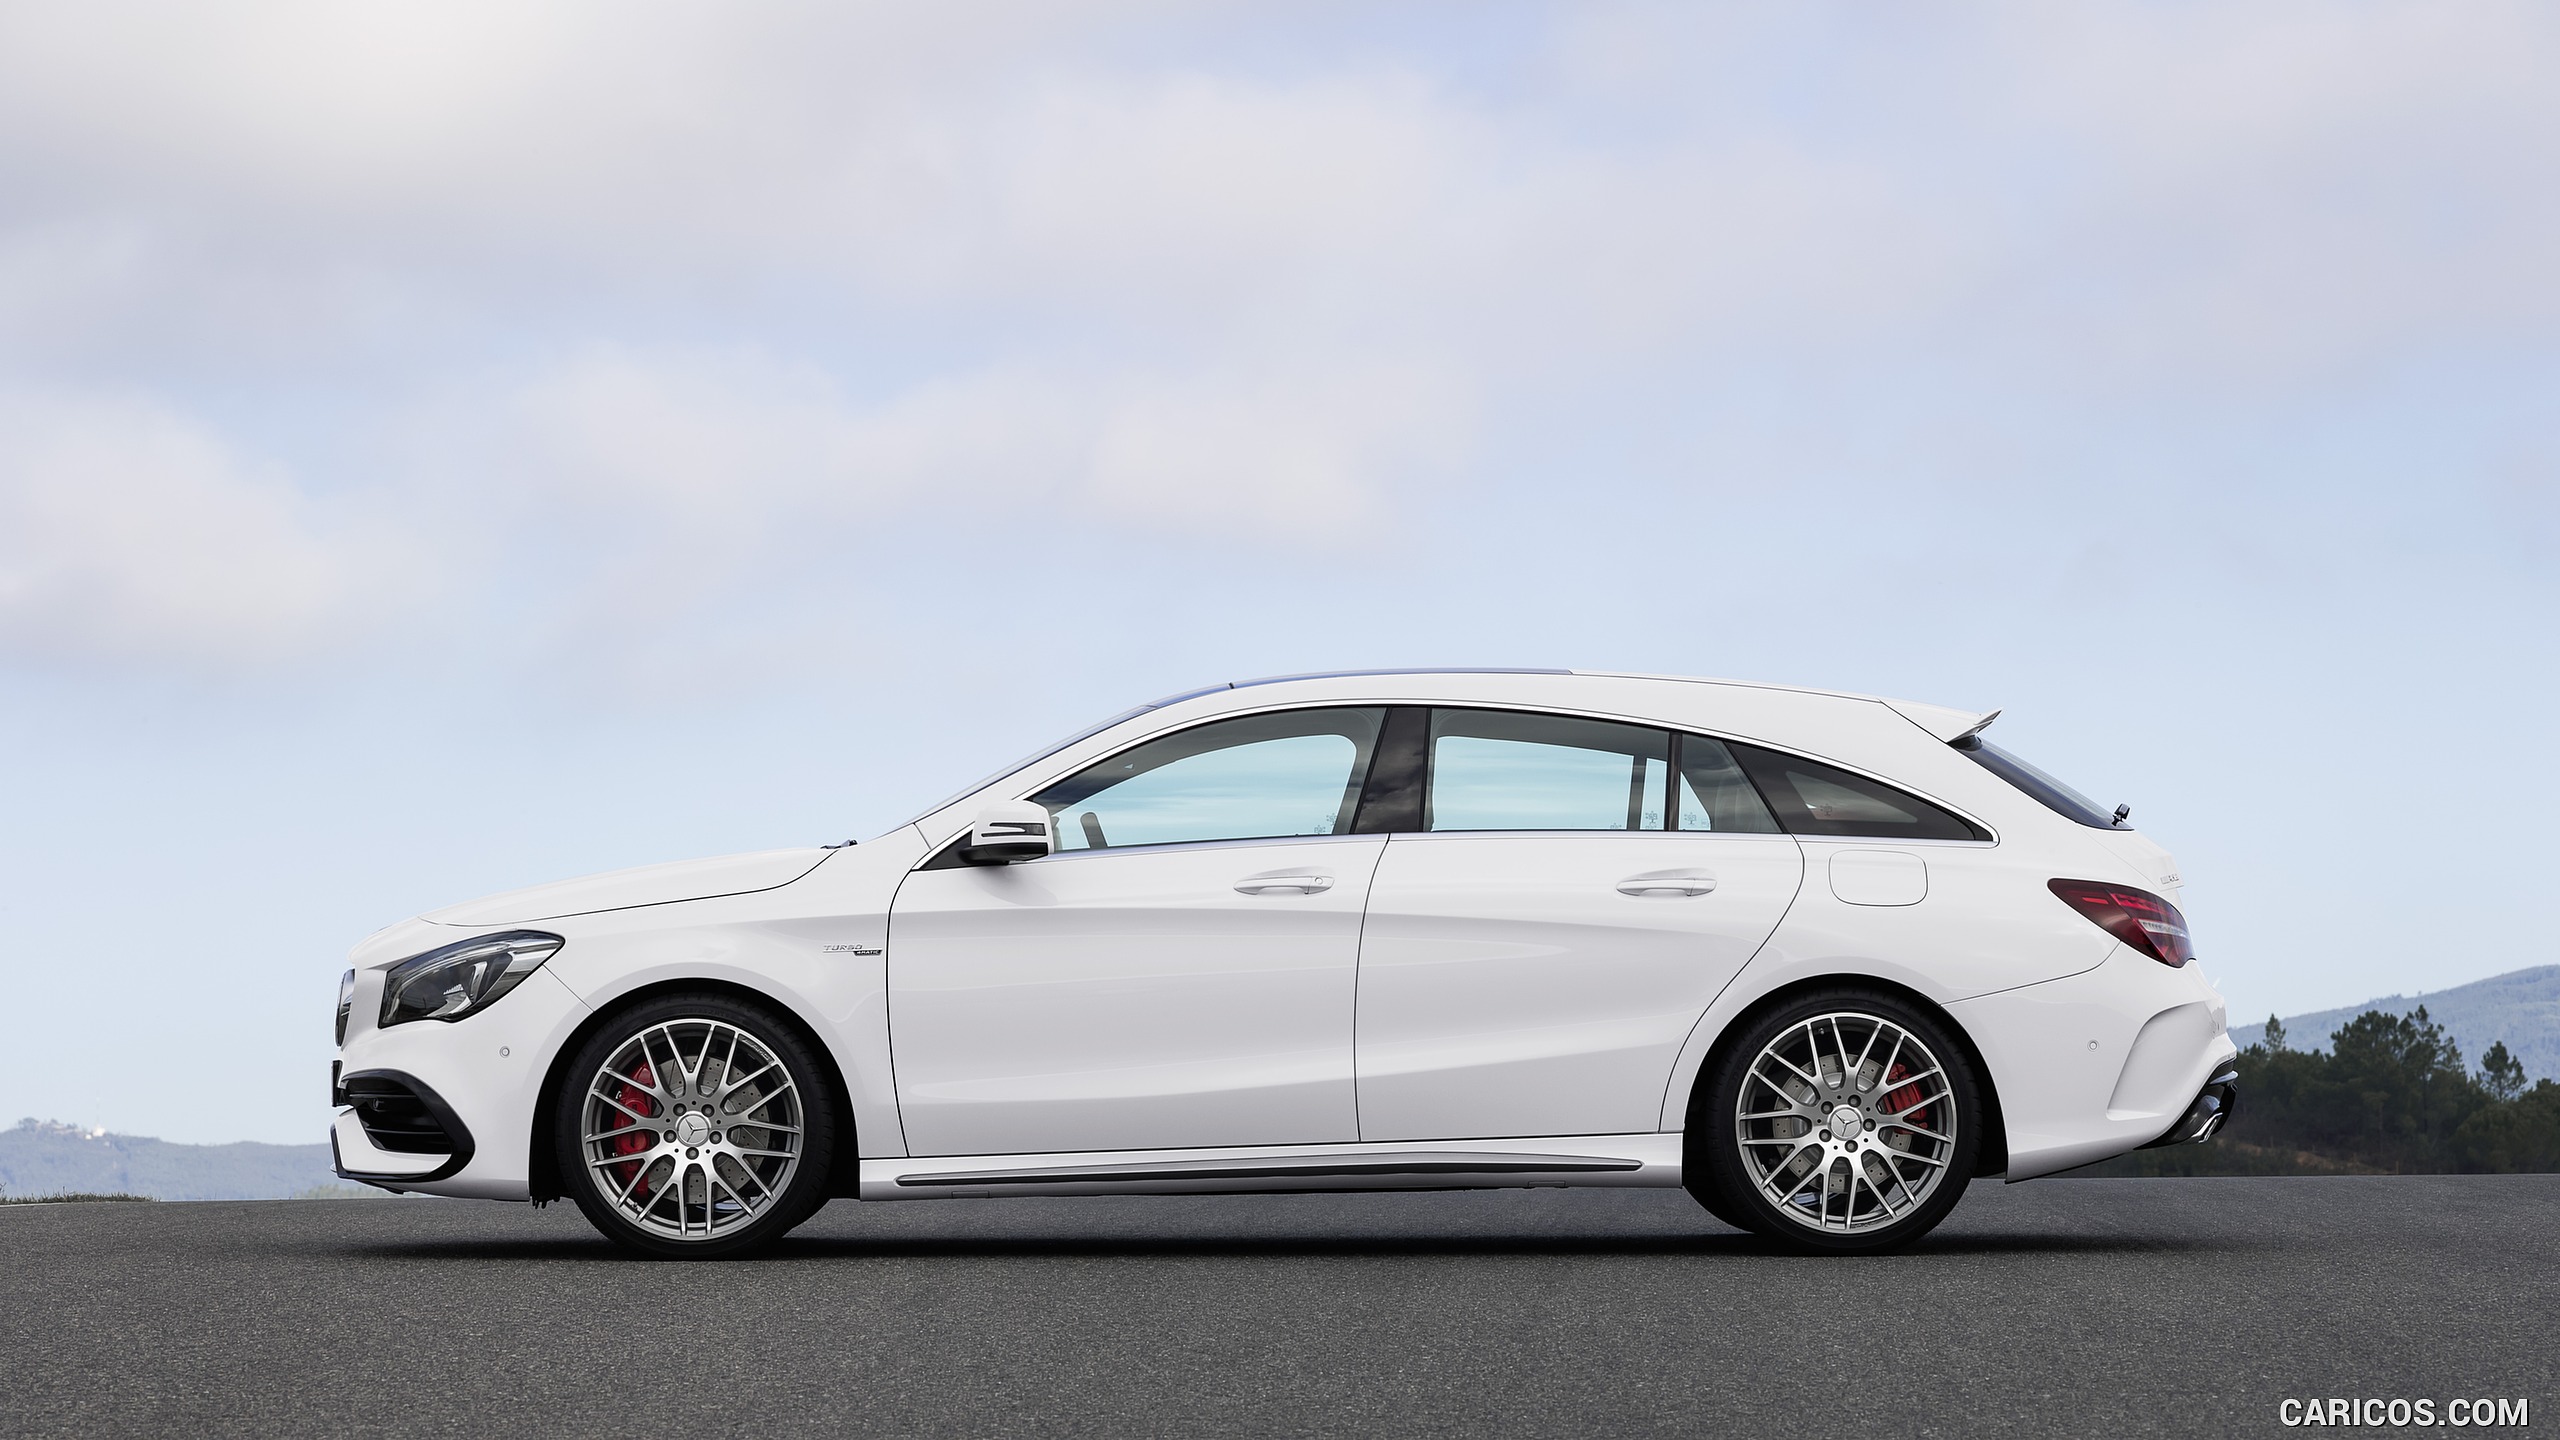 2017 Mercedes-AMG CLA 45 Shooting Brake (Chassis: X117, Color: Diamond White) - Side, #8 of 48